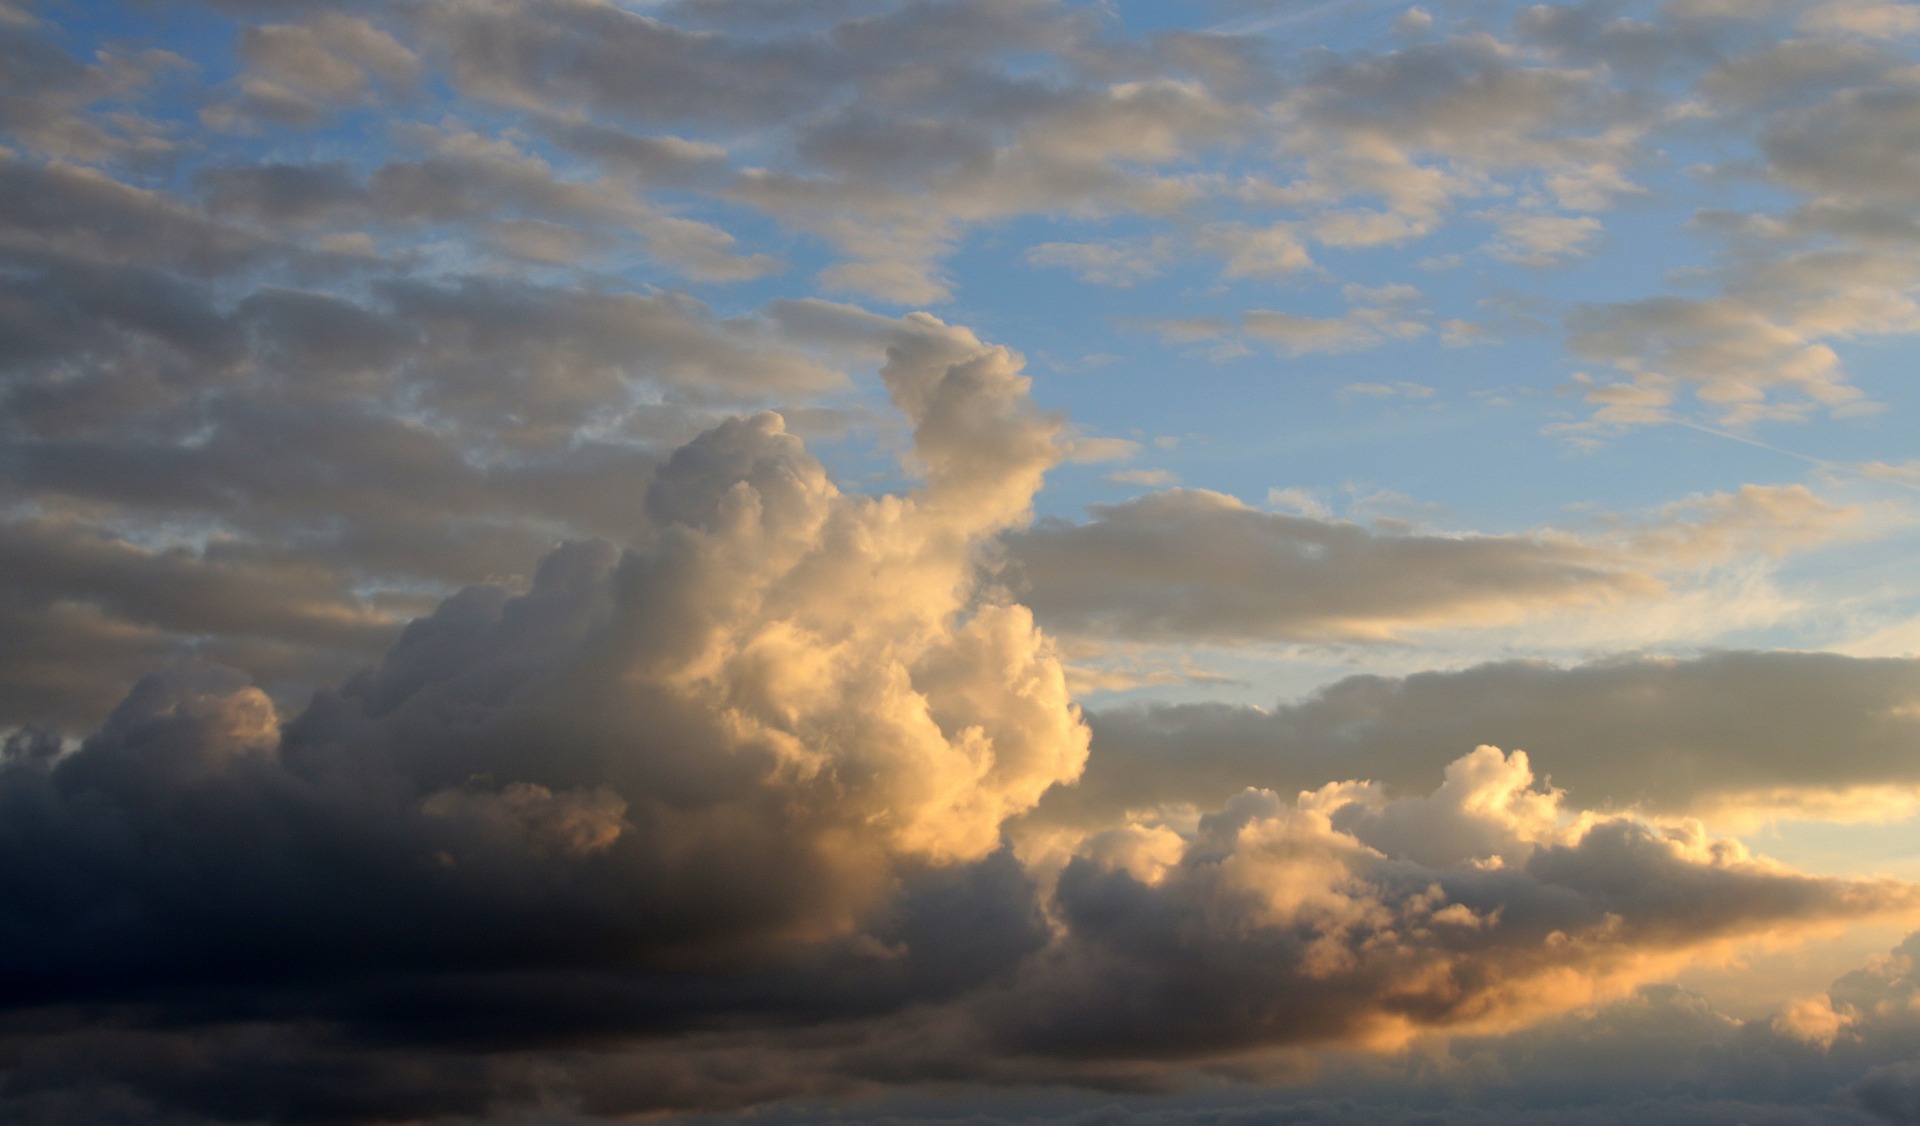 Sunset Clouds, Clouds, Eve, Evening, Nature, HQ Photo